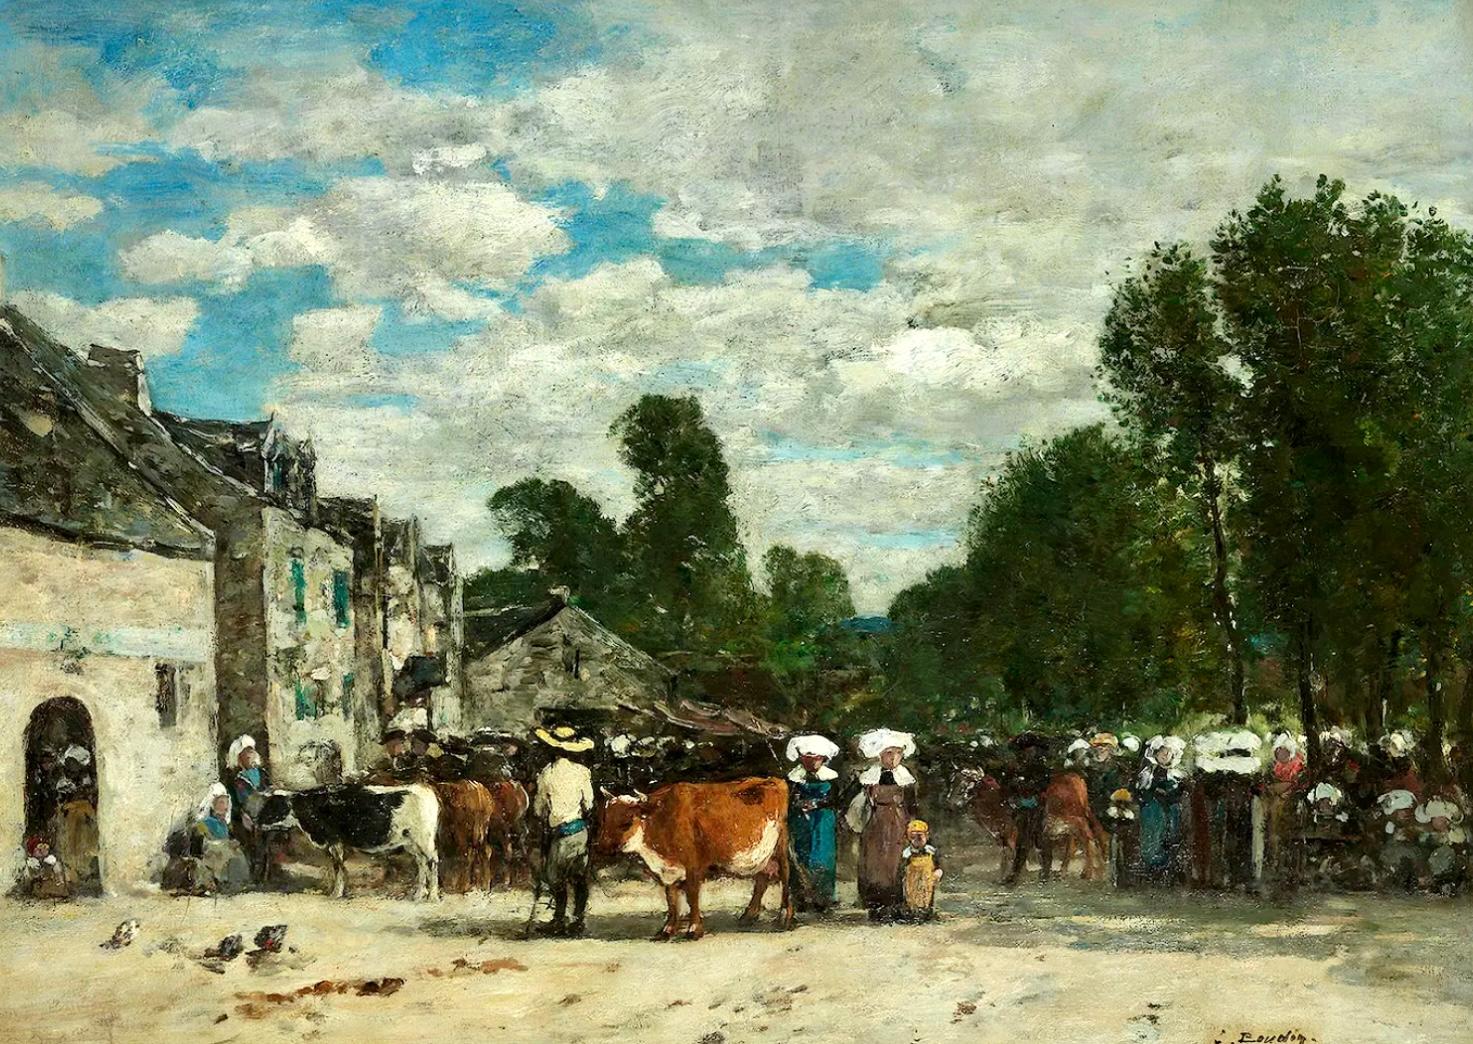 What art movement does the 1892 painting by Eugène Boudin represent?